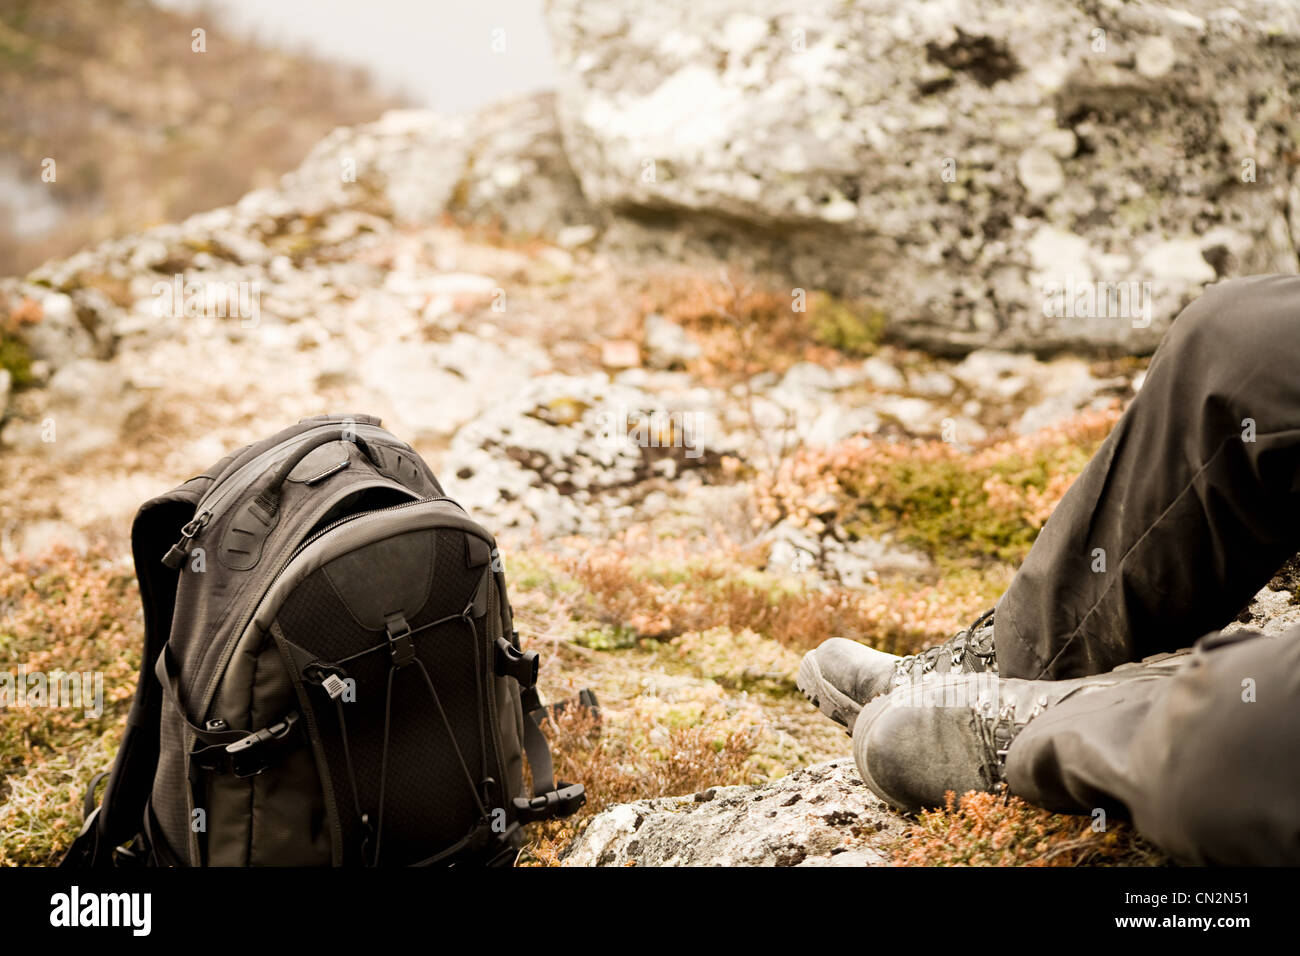 Man resting on rocks with backpack Stock Photo